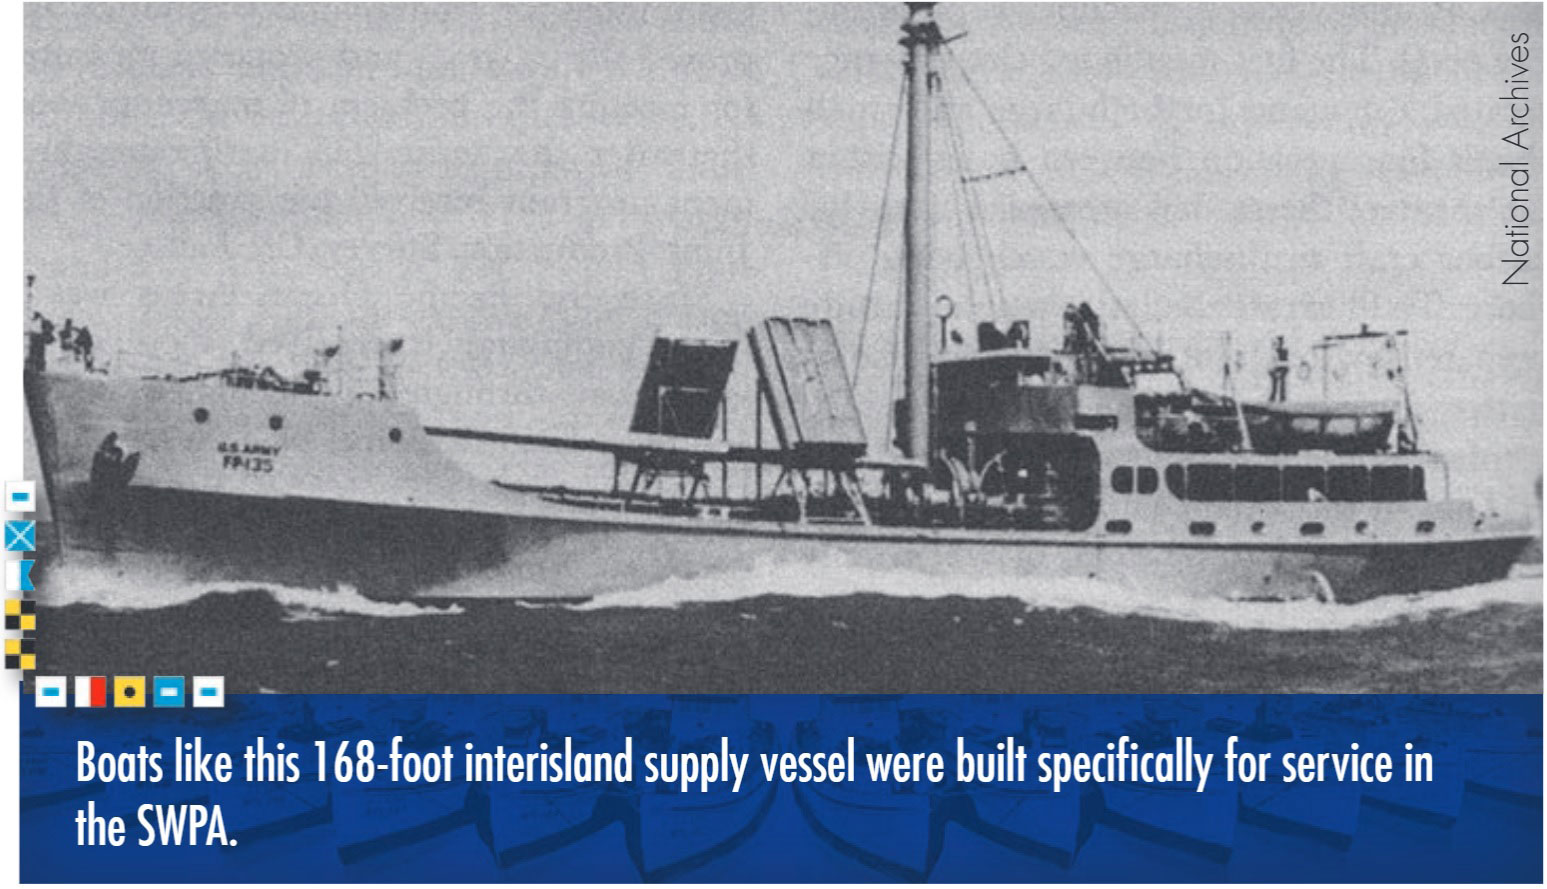 Boaks like this 168-foot interisland supply vessel built specifically for service in the SWPA. Photo from the National Archives. 